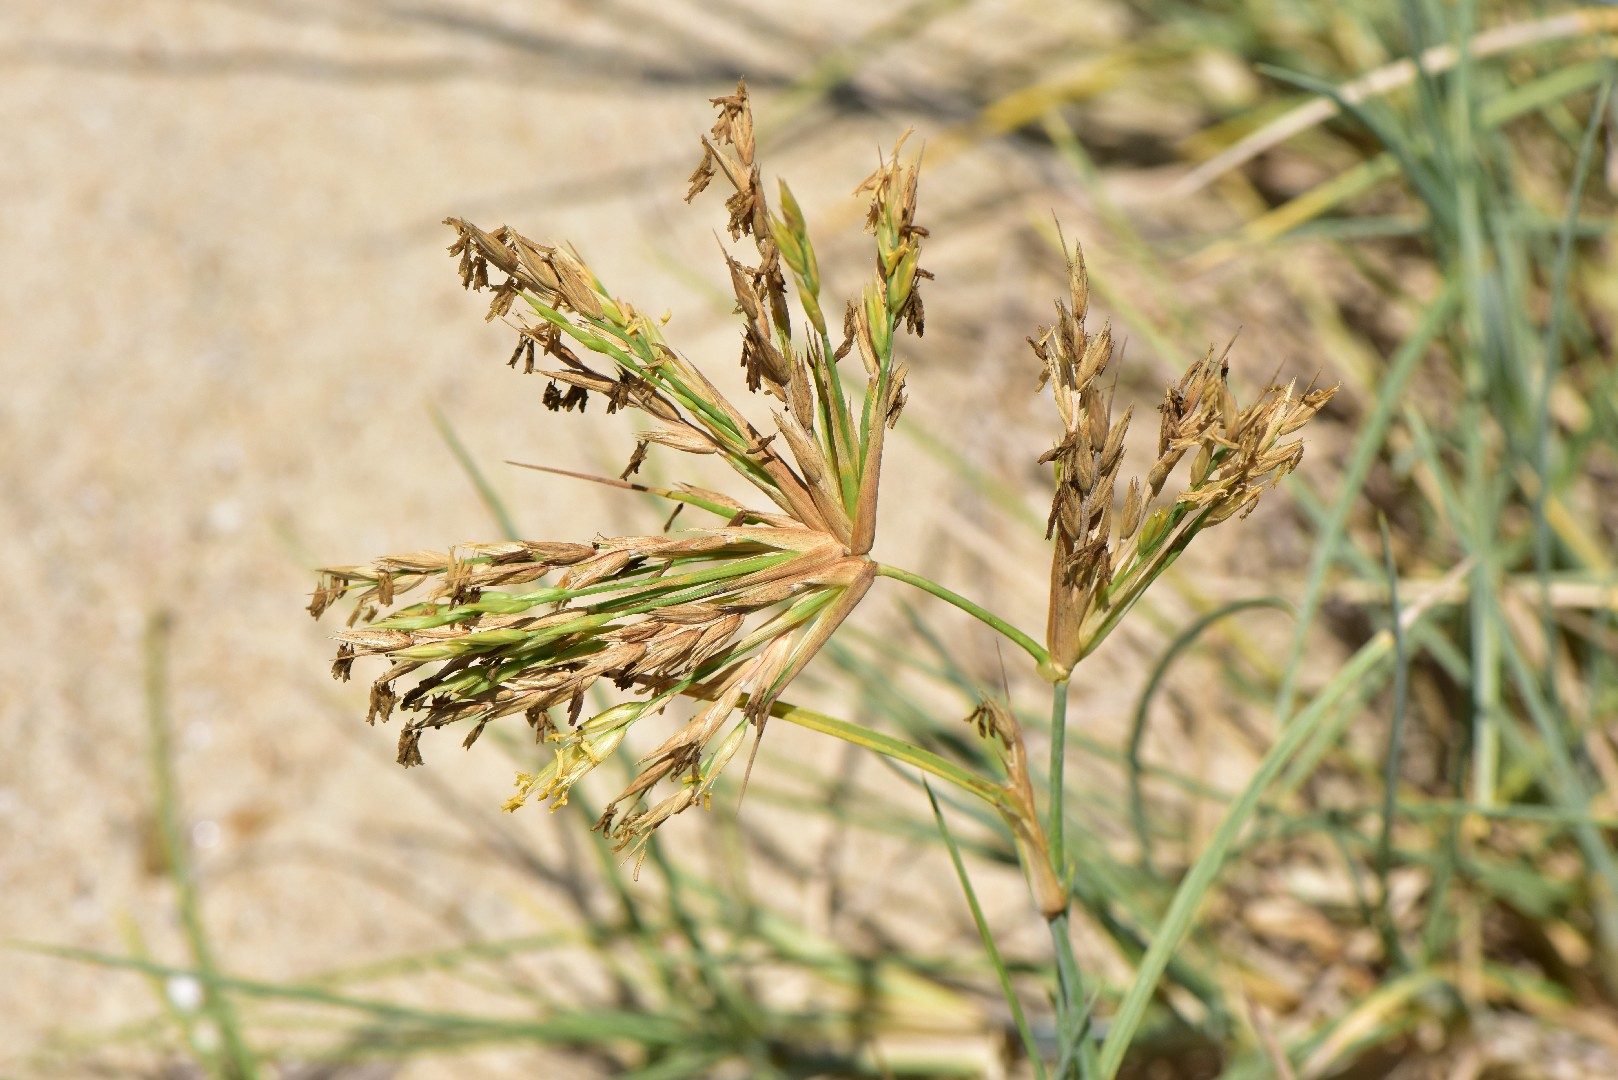 Spinifex (Spinifex)